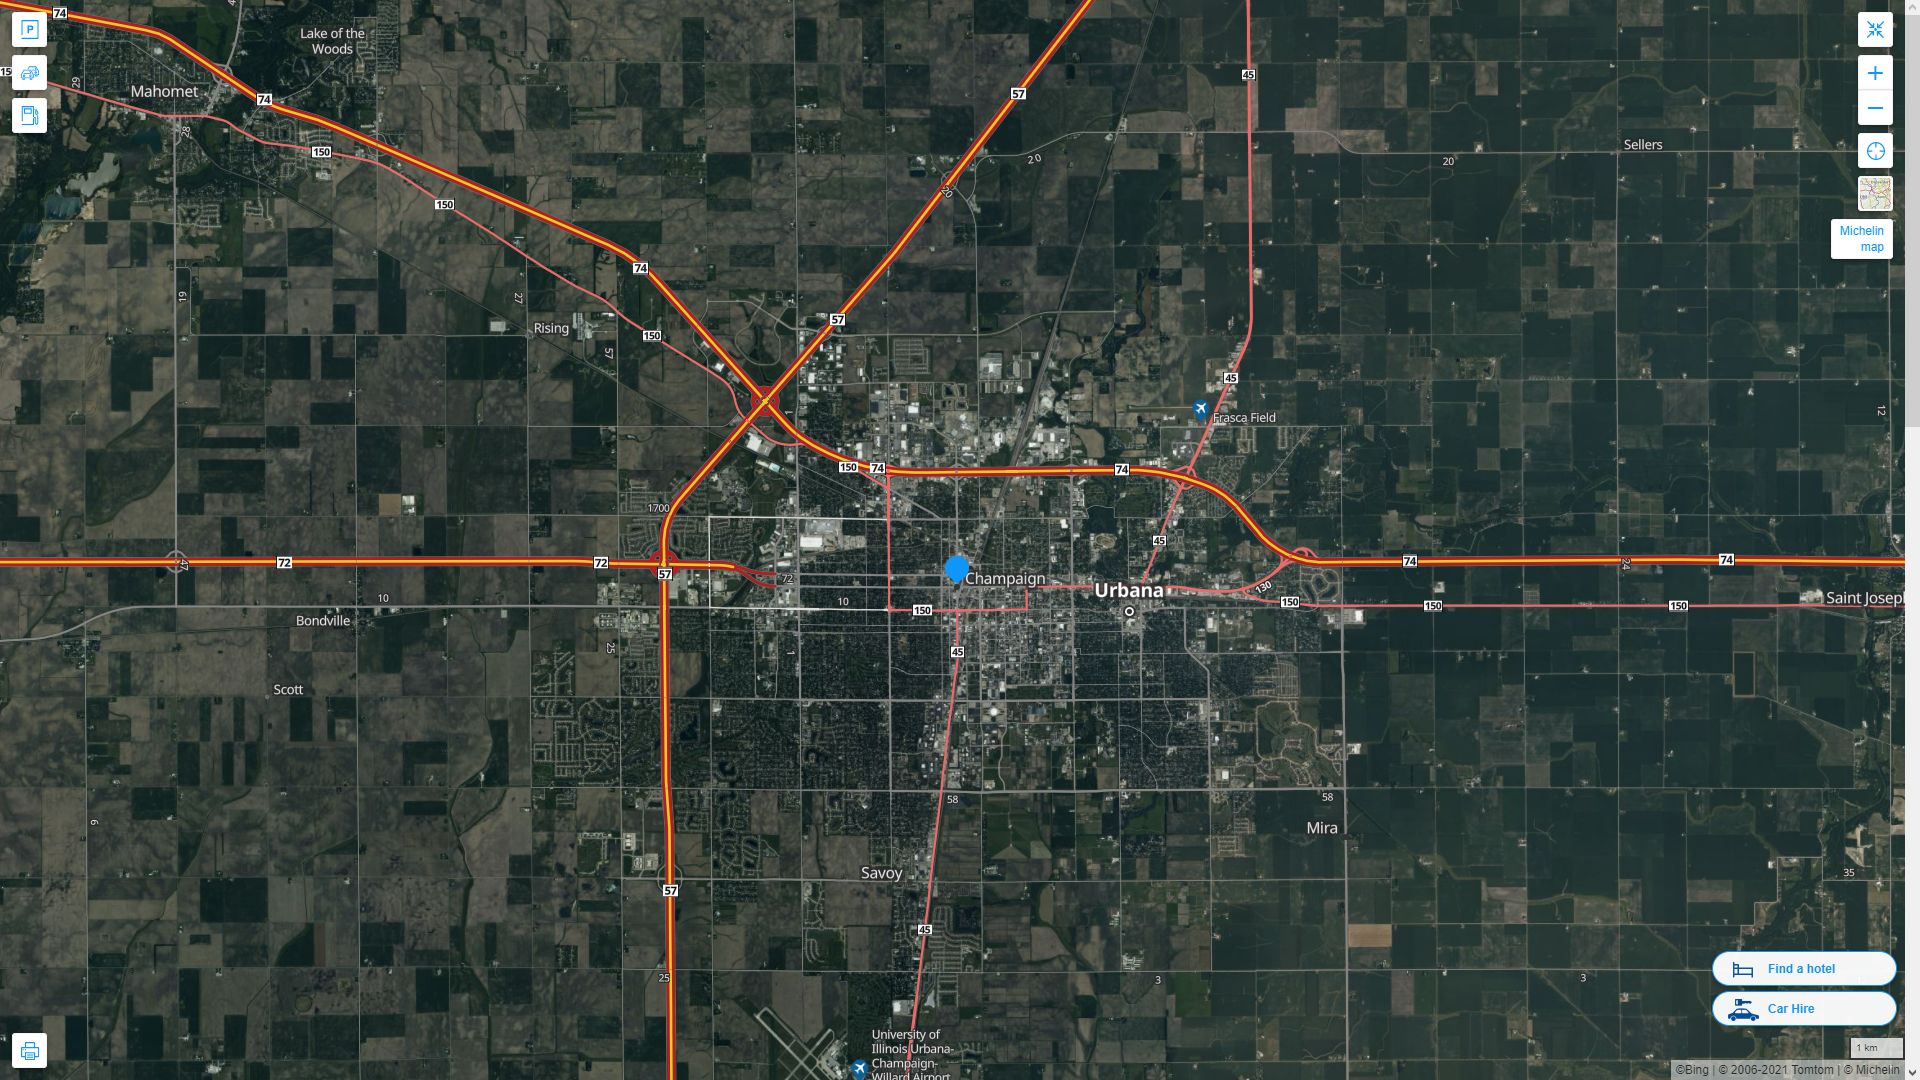 Champaign illinois Highway and Road Map with Satellite View